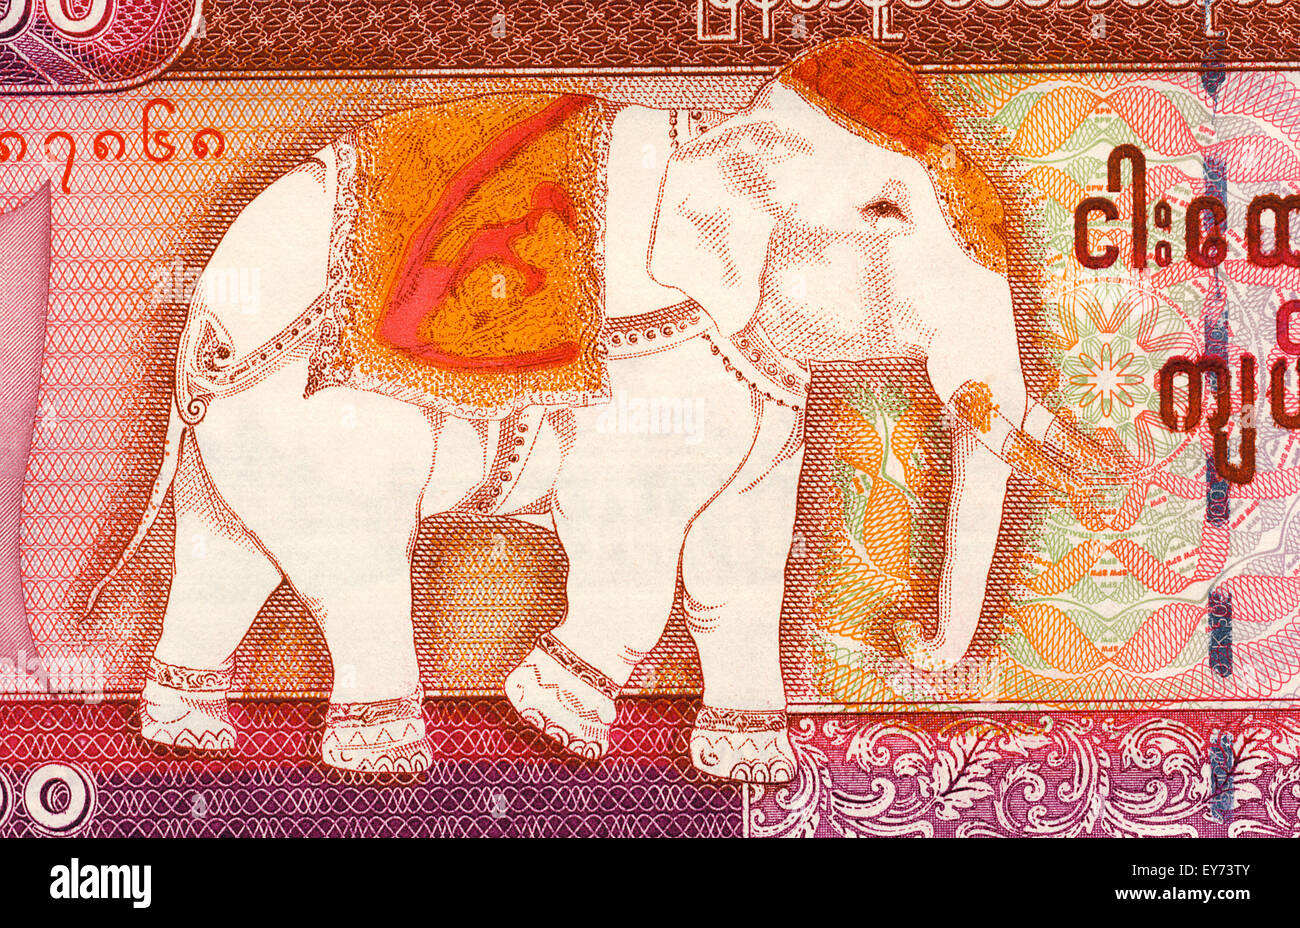 Close up detail of an elephant on a 5000 Kyats banknote from Myanmar (Burma). Stock Photo